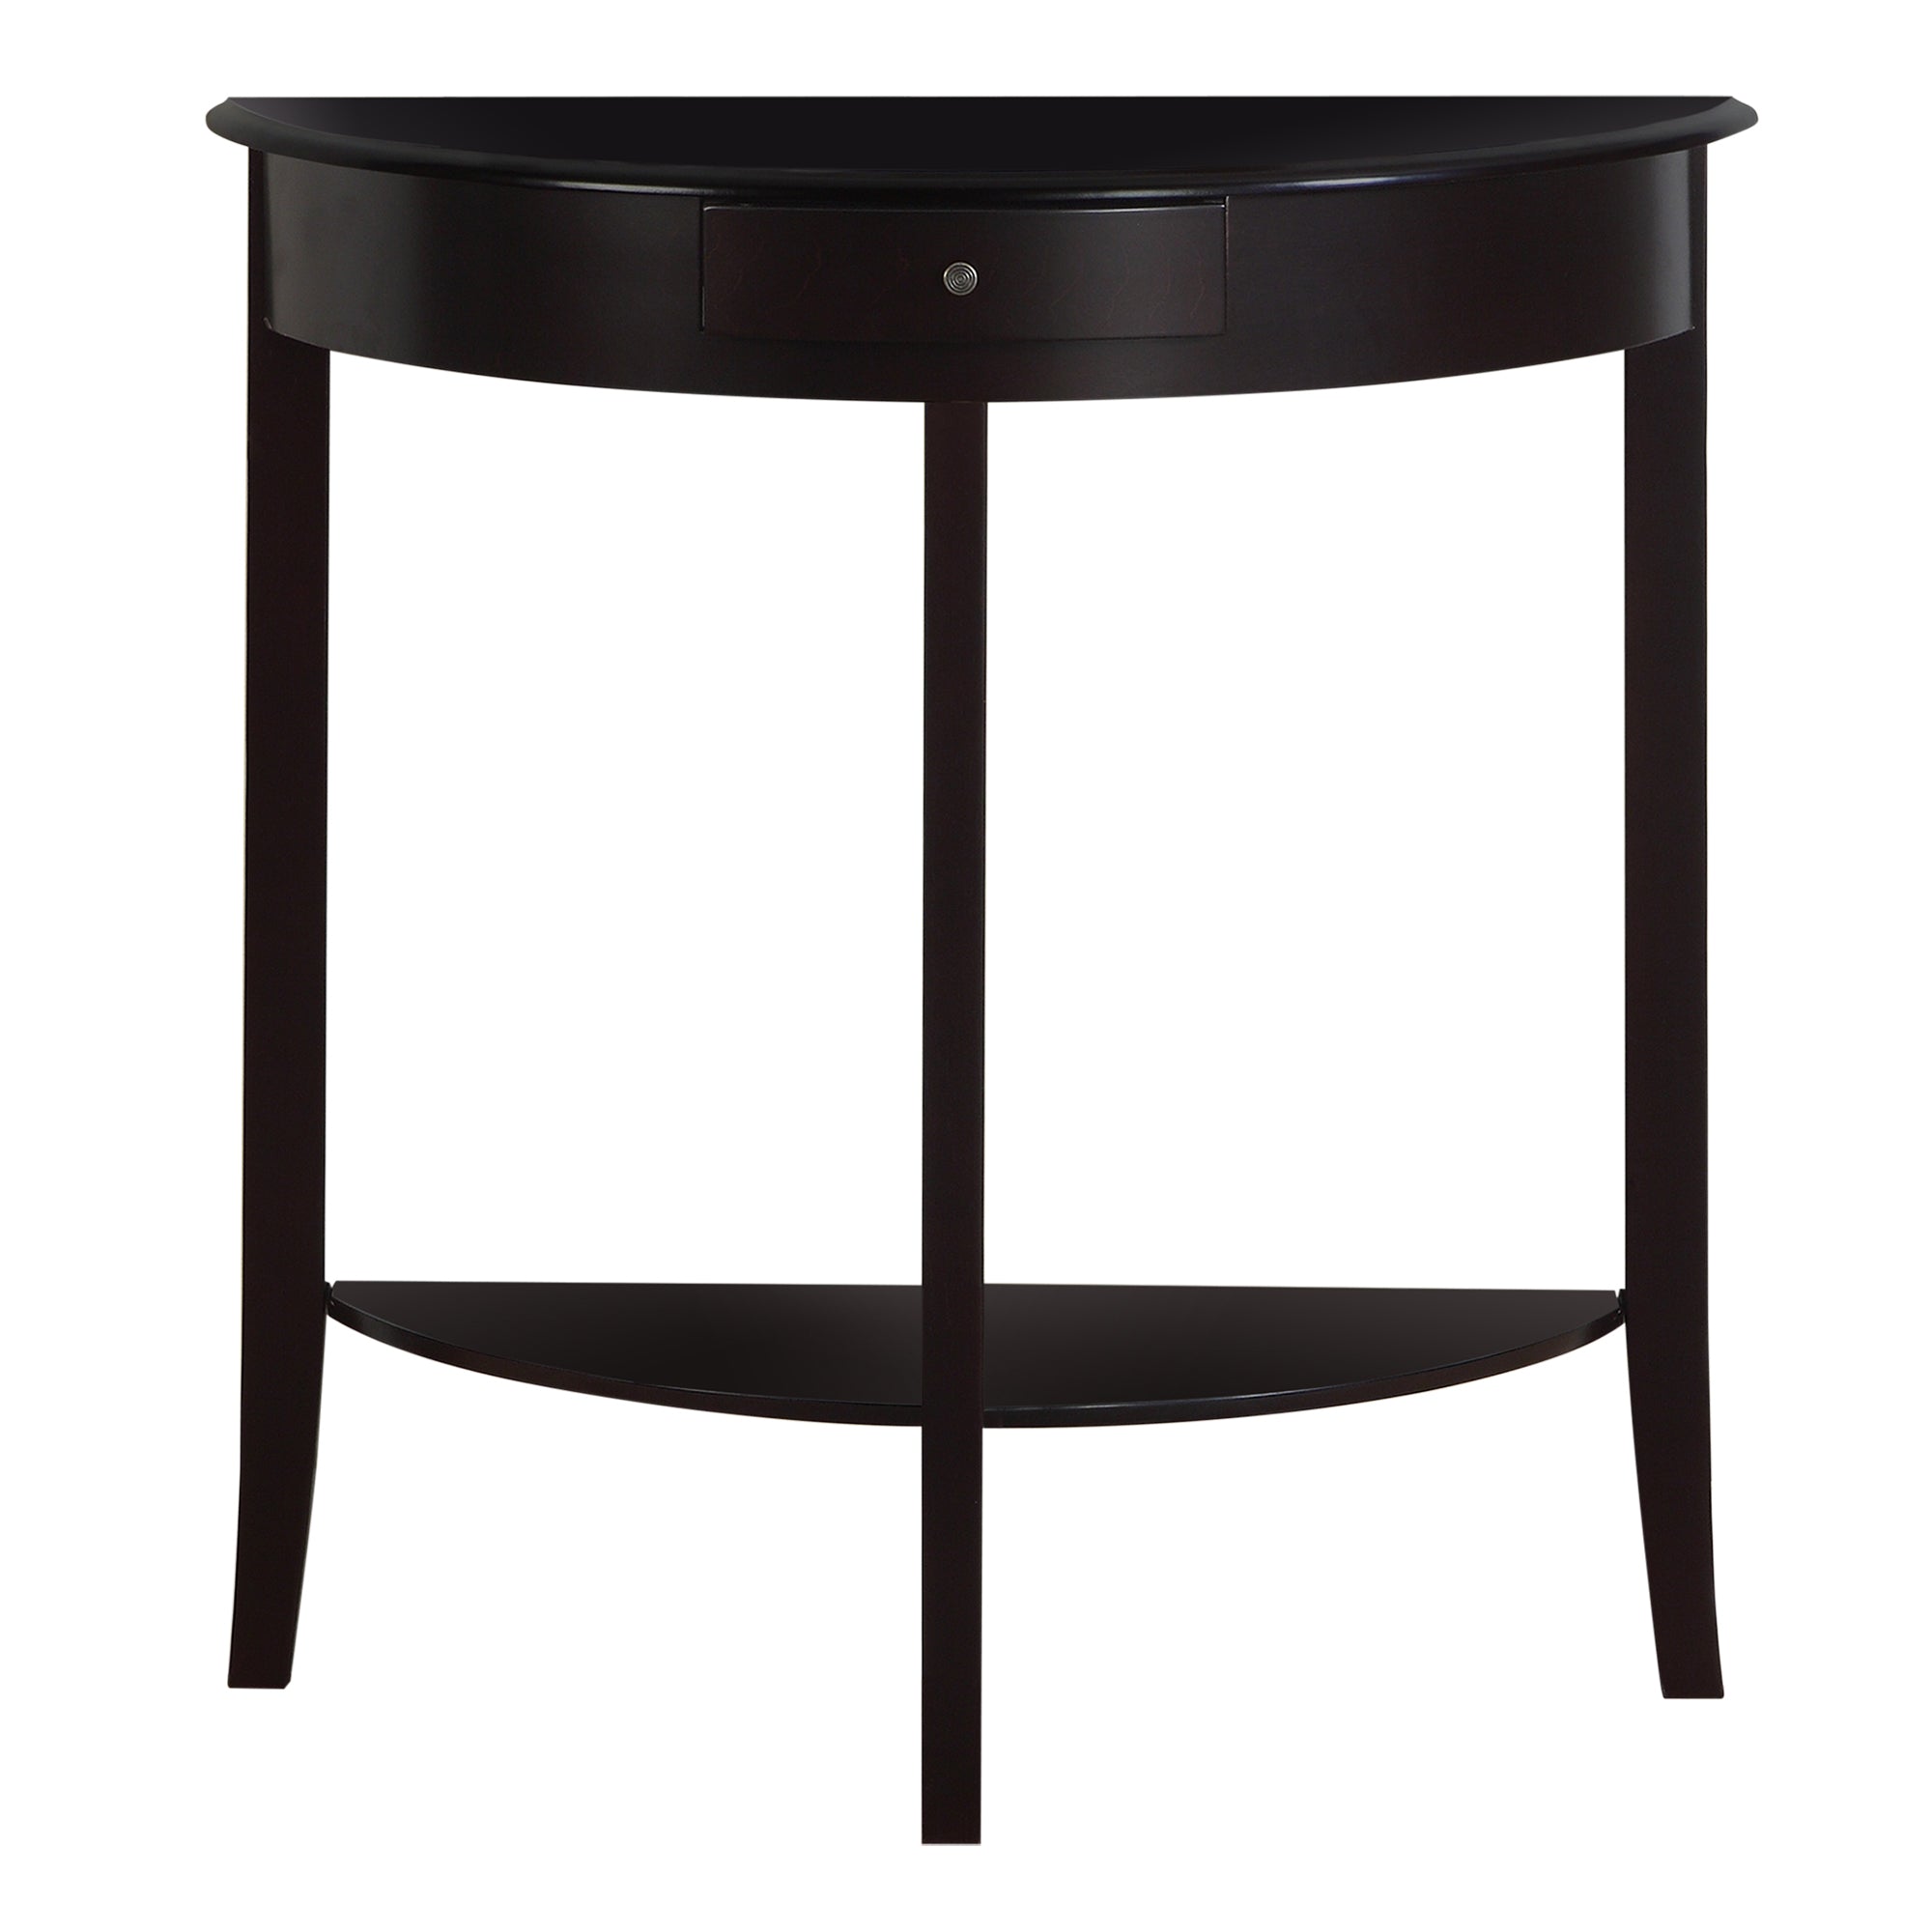 32" Dark Brown End Table With Shelf